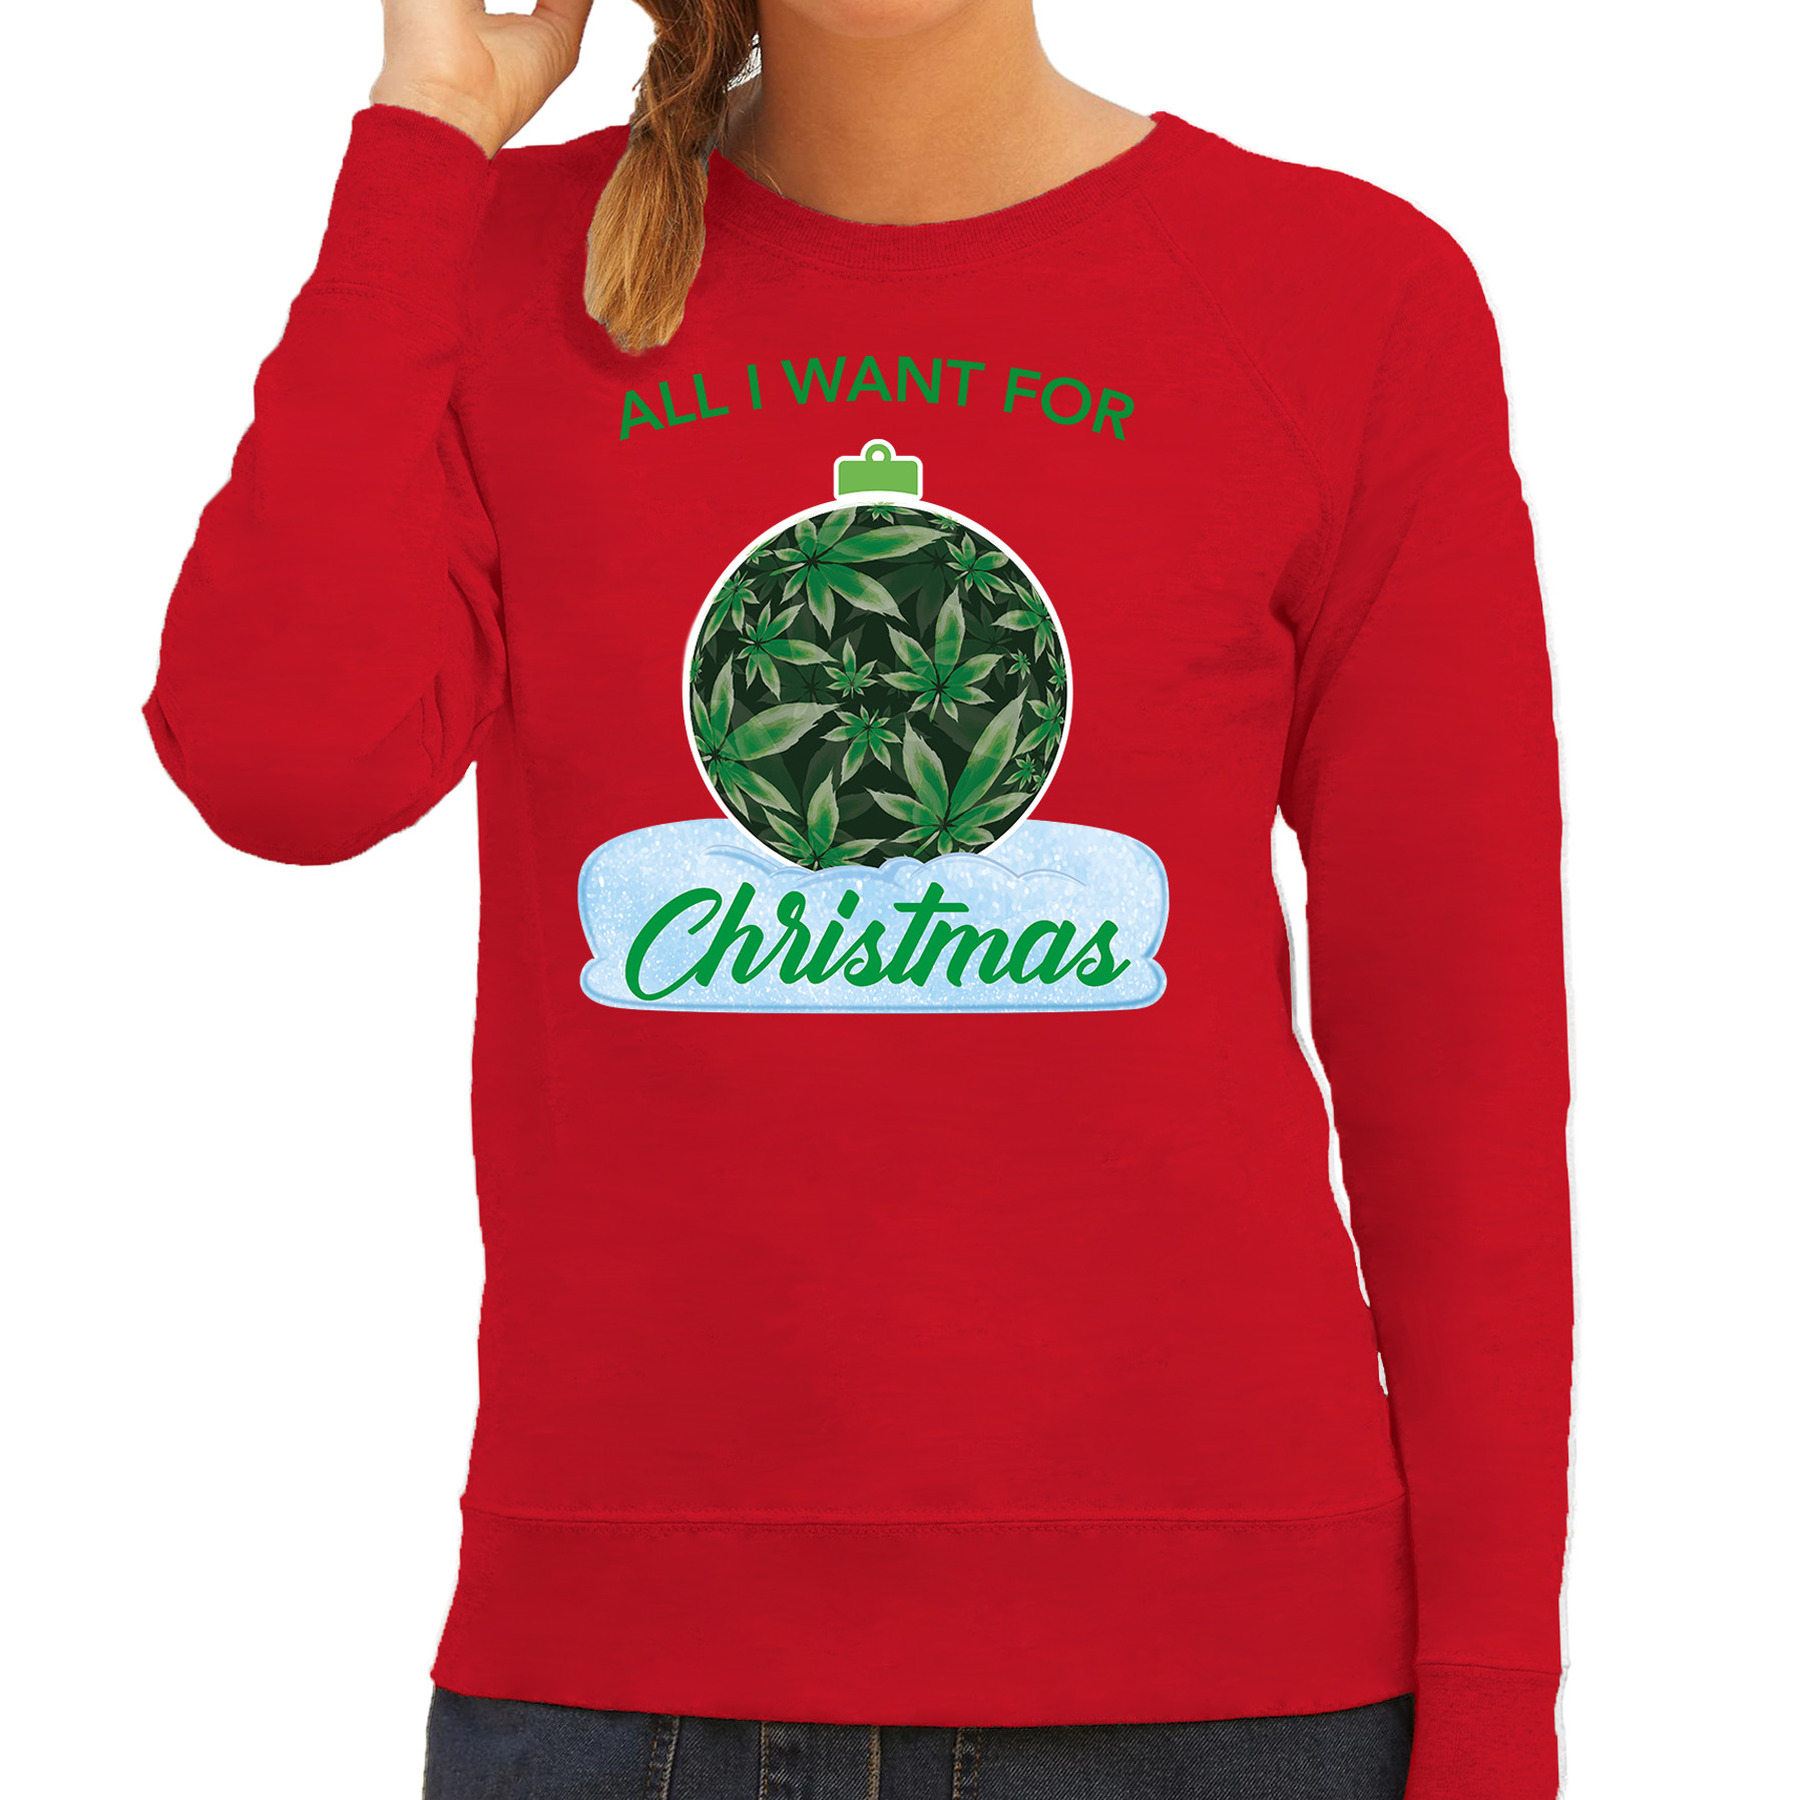 Wiet Kerstbal sweater-outfit All i want for Christmas rood voor dames